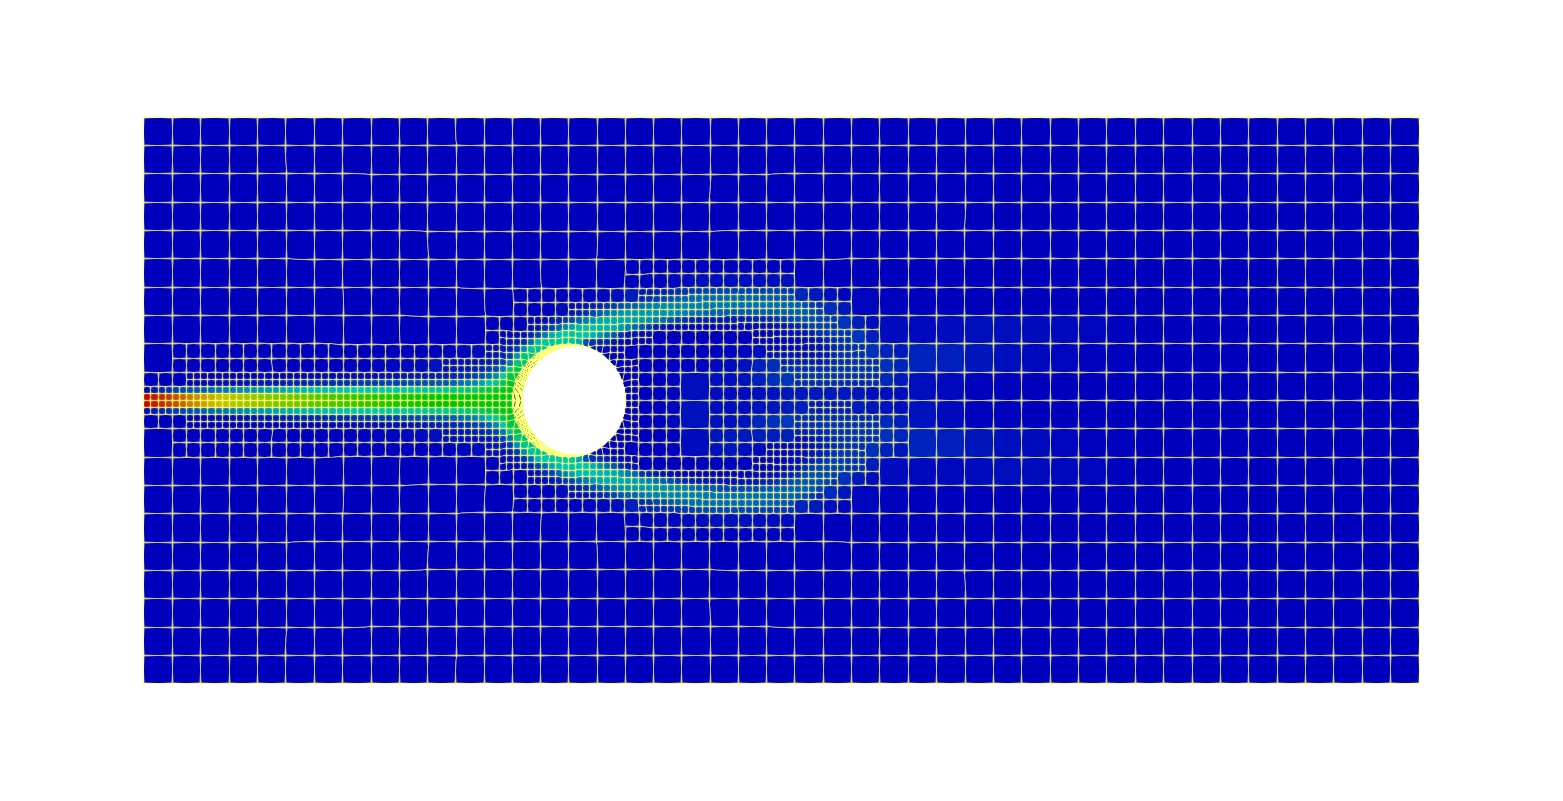 Image: Passive scalar tracer around the cylinder